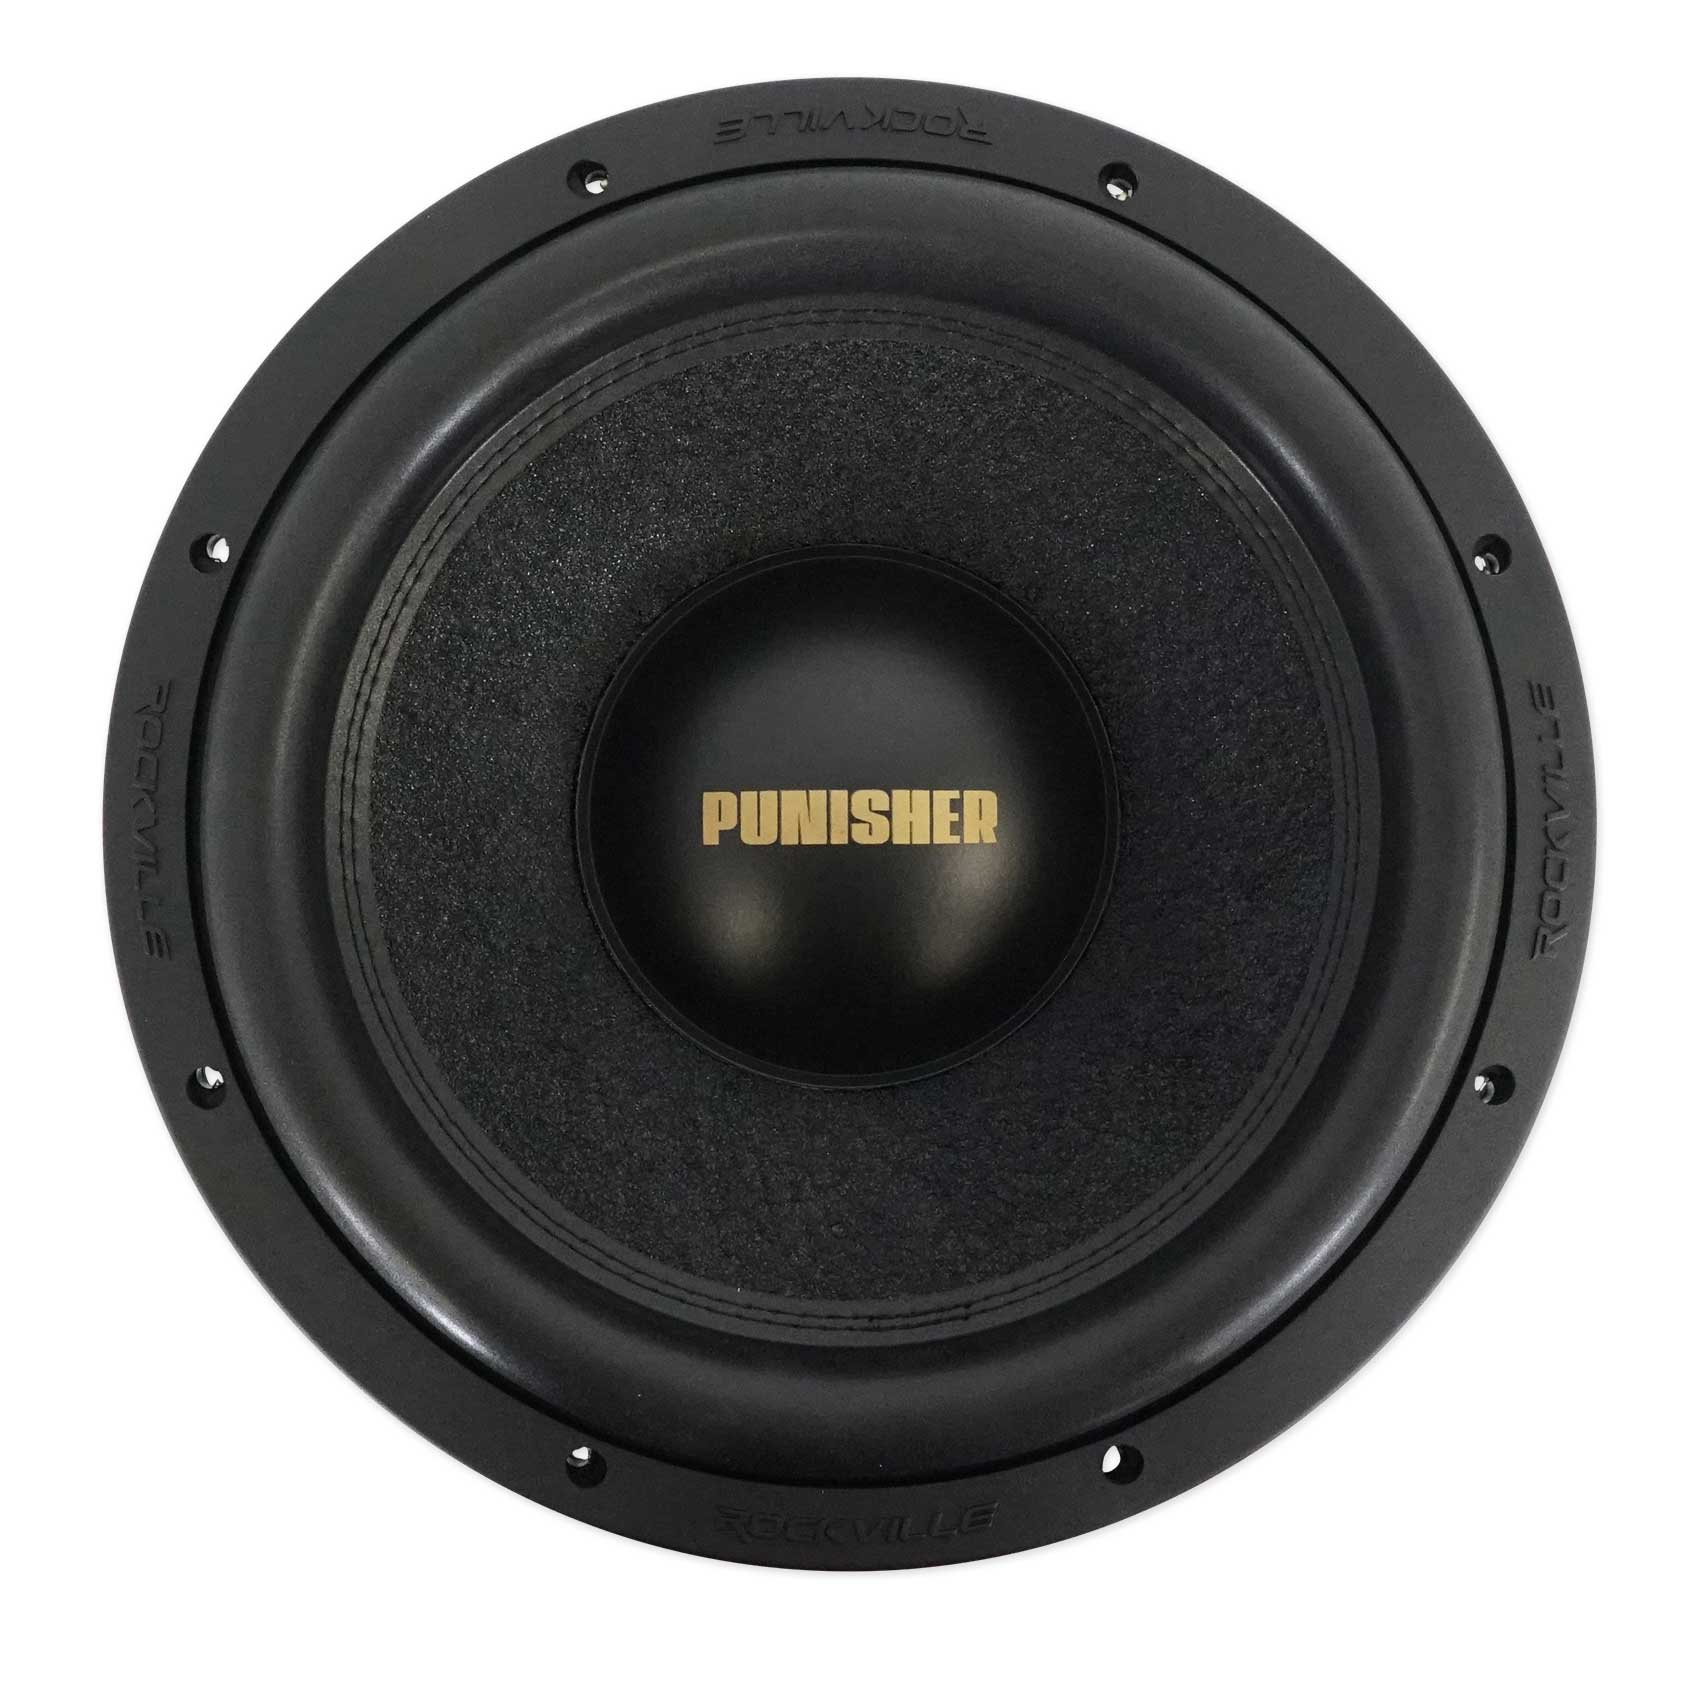 Rockville Punisher 12D1 12" 5600w Peak Car Audio Competition Subwoofer Dual 1-Ohm Sub 1400w RMS CEA Rated - image 2 of 11